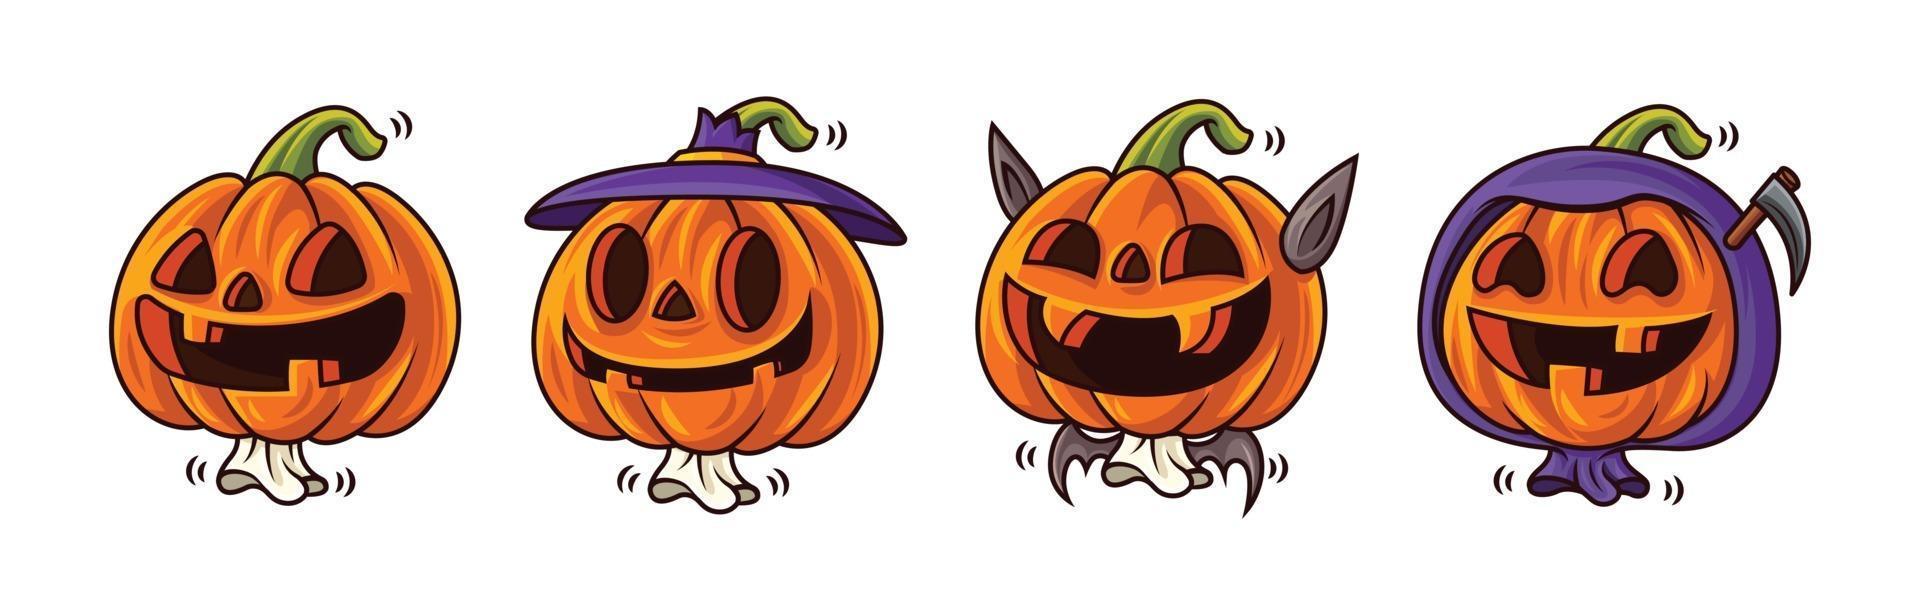 Happy Halloween. Cartoon series of cute Jack O Lantern pumpkin character with funny face expression and halloween costumes. Mascot set. vector